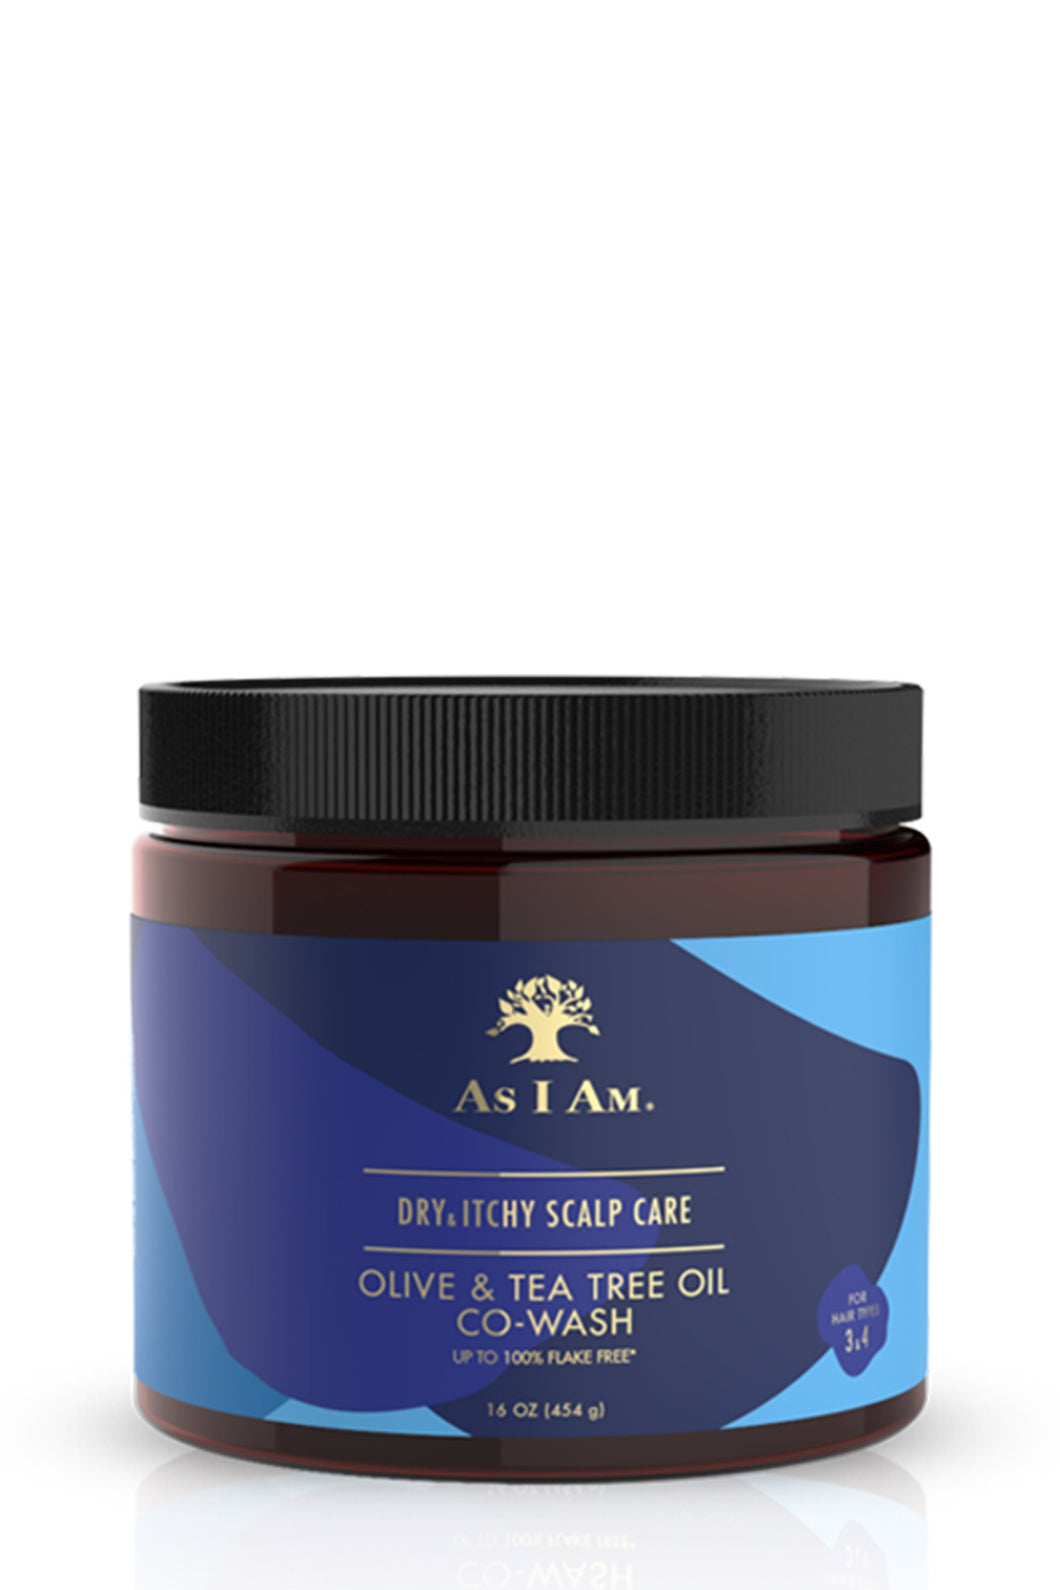 As I Am Dry And Itchy Scalp Care Olive And Tea Tree Oil Co Wash 454g The Afro Beauty Company